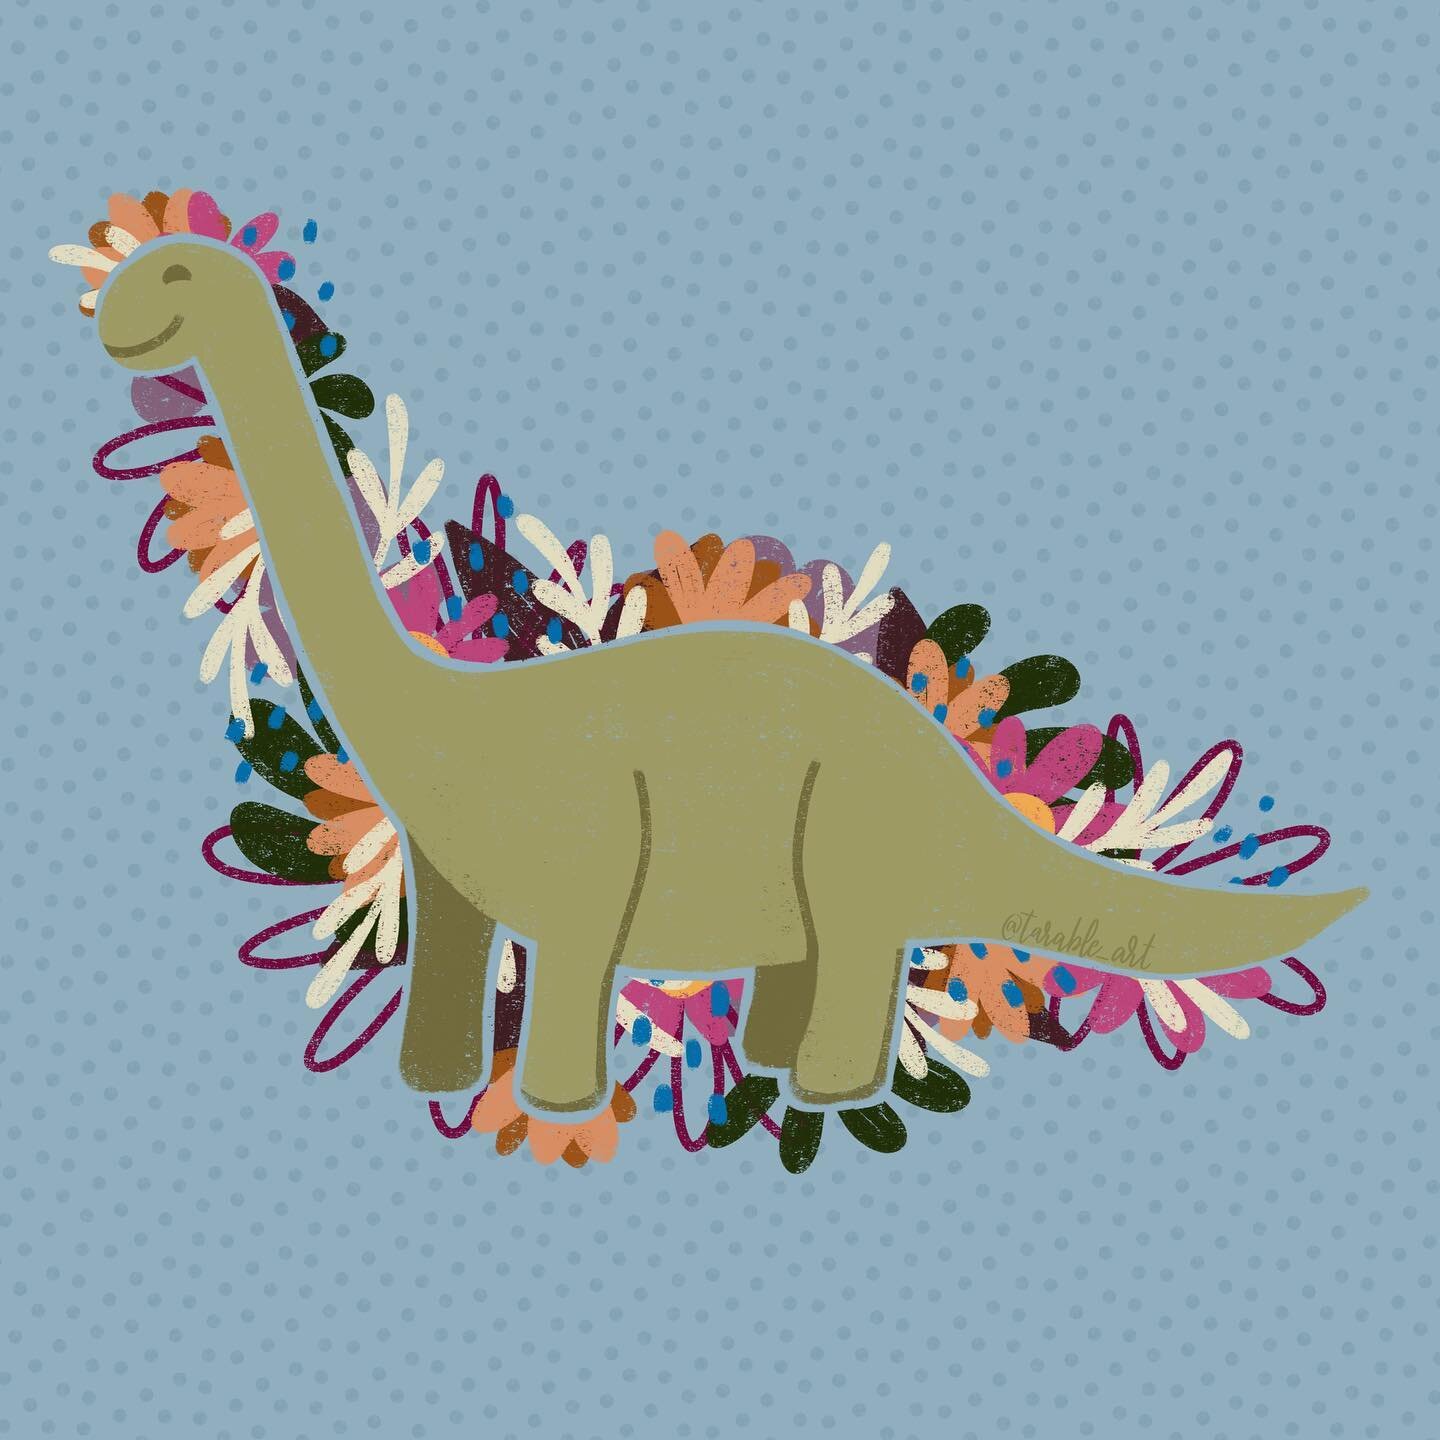 I was surprised how many animals I&rsquo;ve already drawn in the past couple of years that start with the letter D, but I&rsquo;ve never drawn a dinosaur (that I recall), so here it is! Pretty simple one today, but I think it&rsquo;s cute!